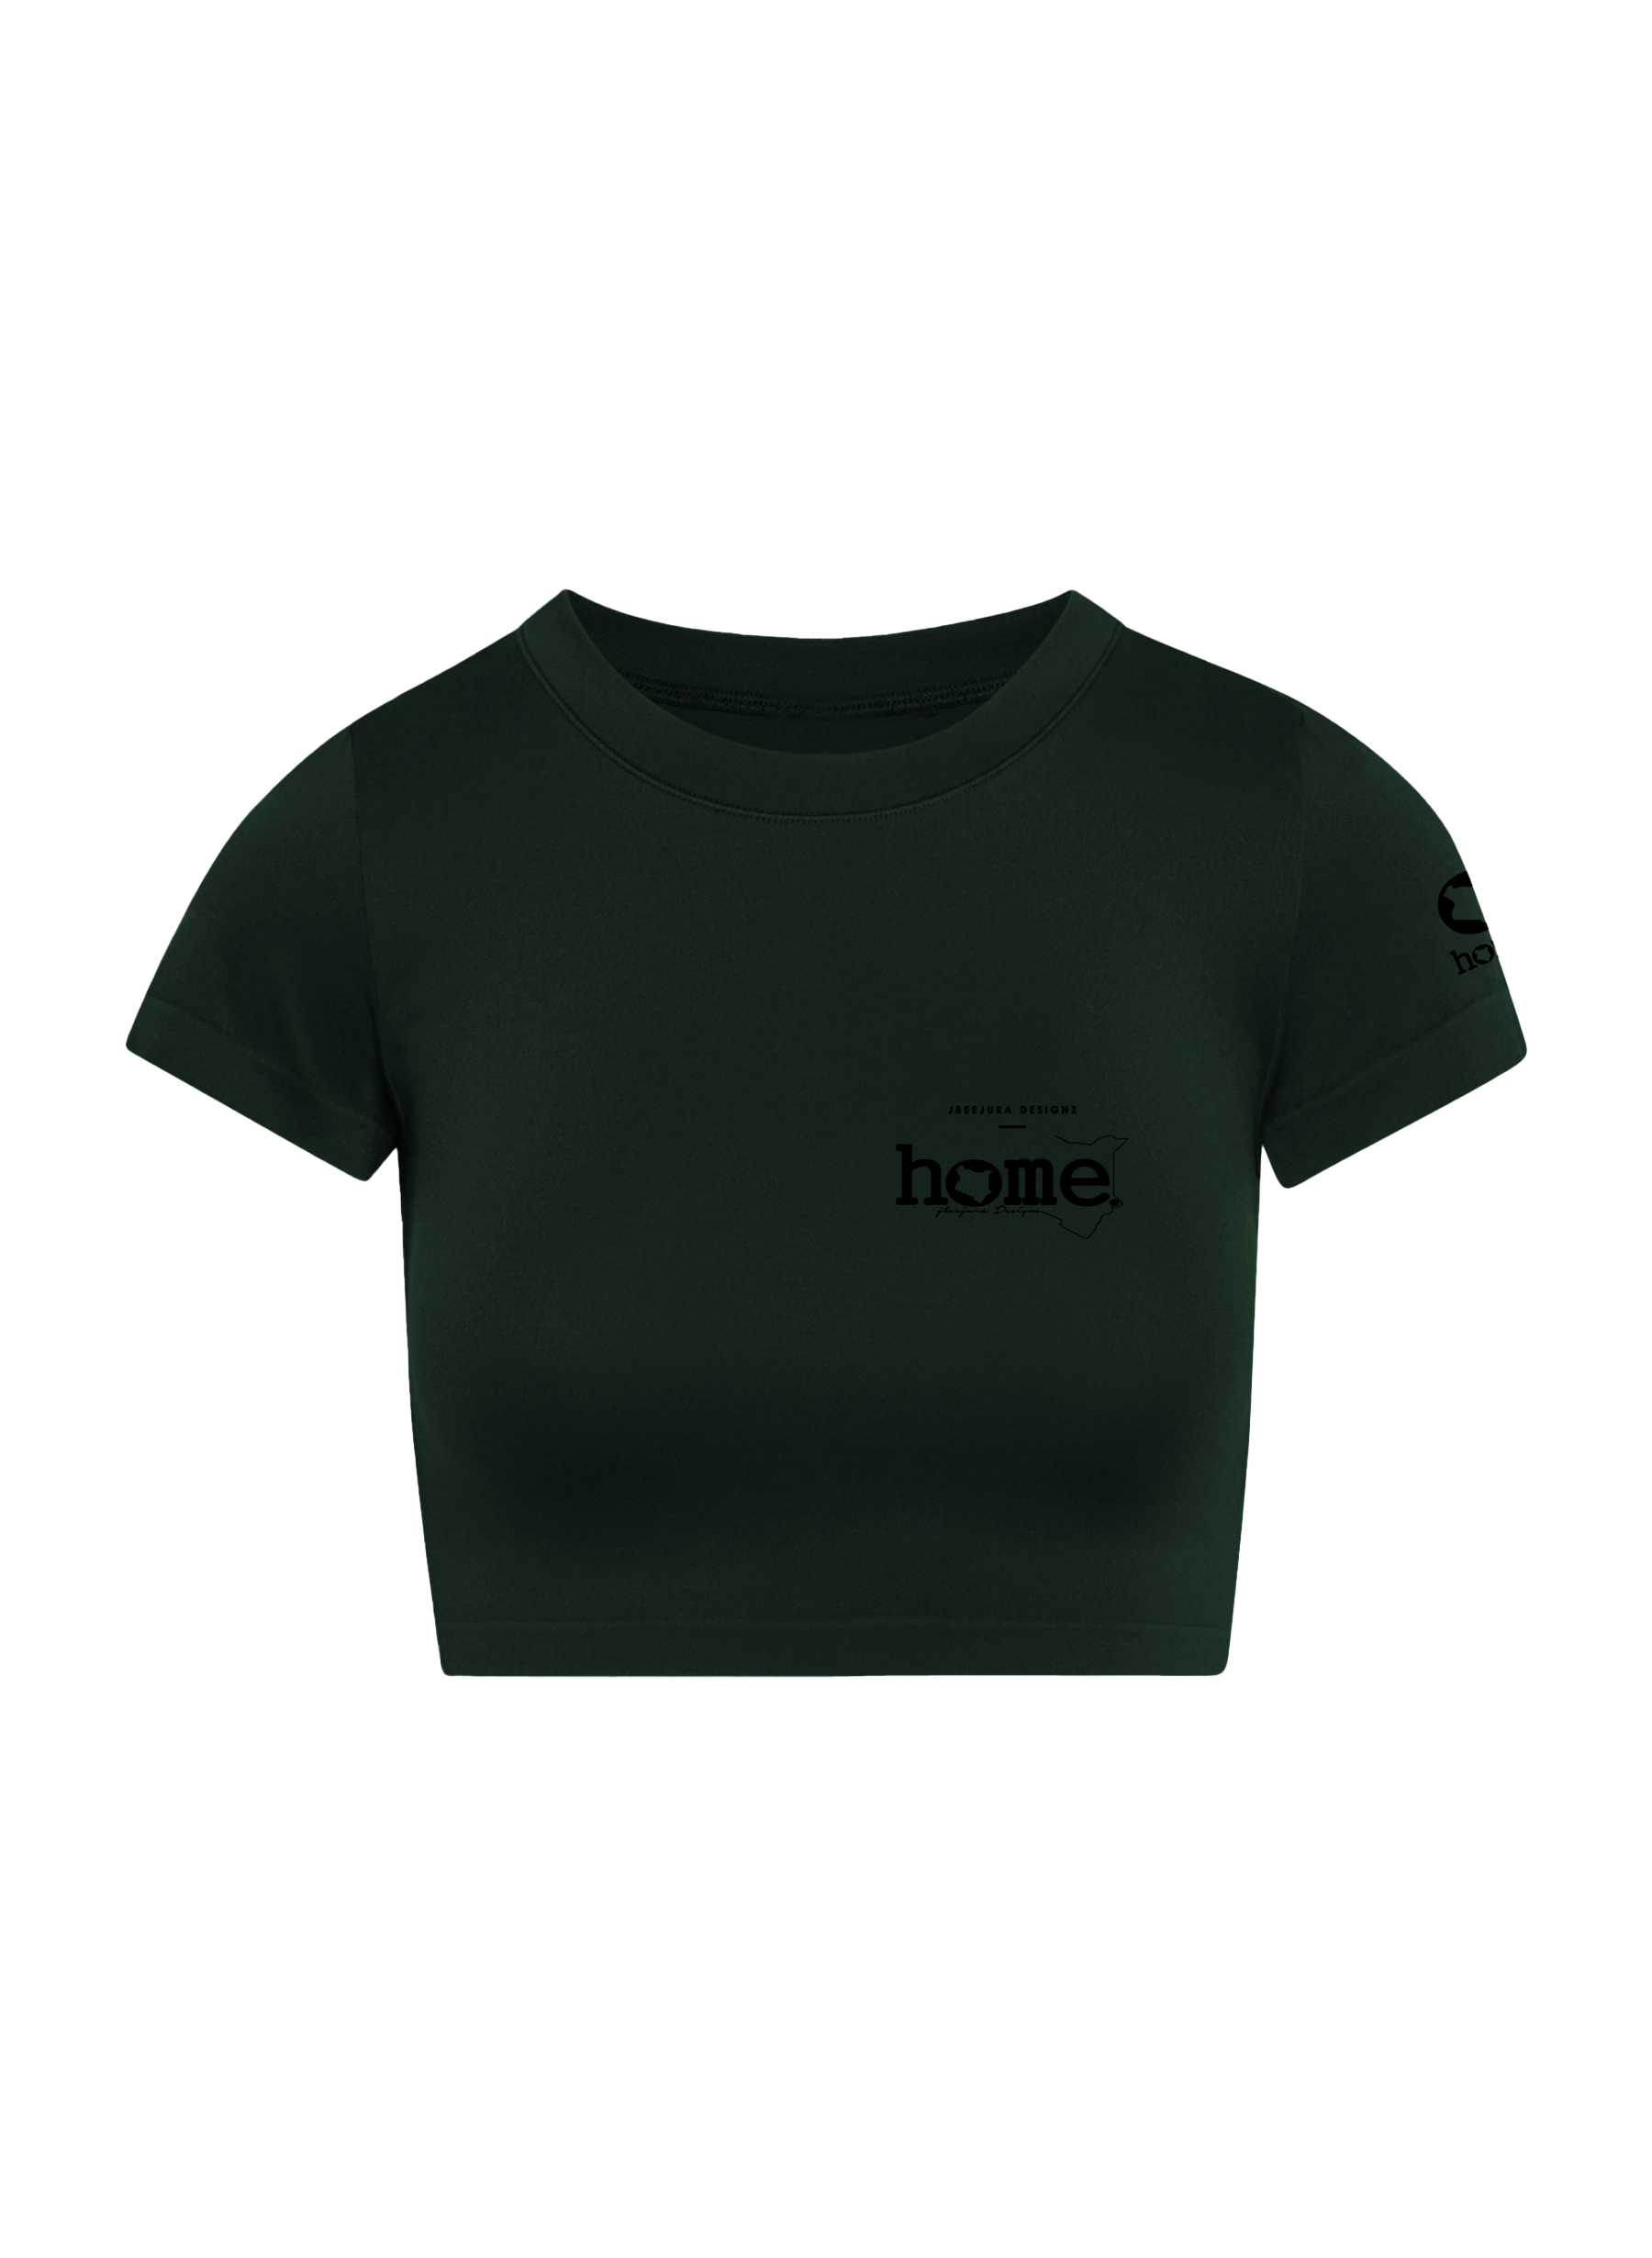 home_254 SHORT SLEEVED FOREST GREEN CROPPED ARIA TEE WITH A BLACK 3D WORDS PRINT 